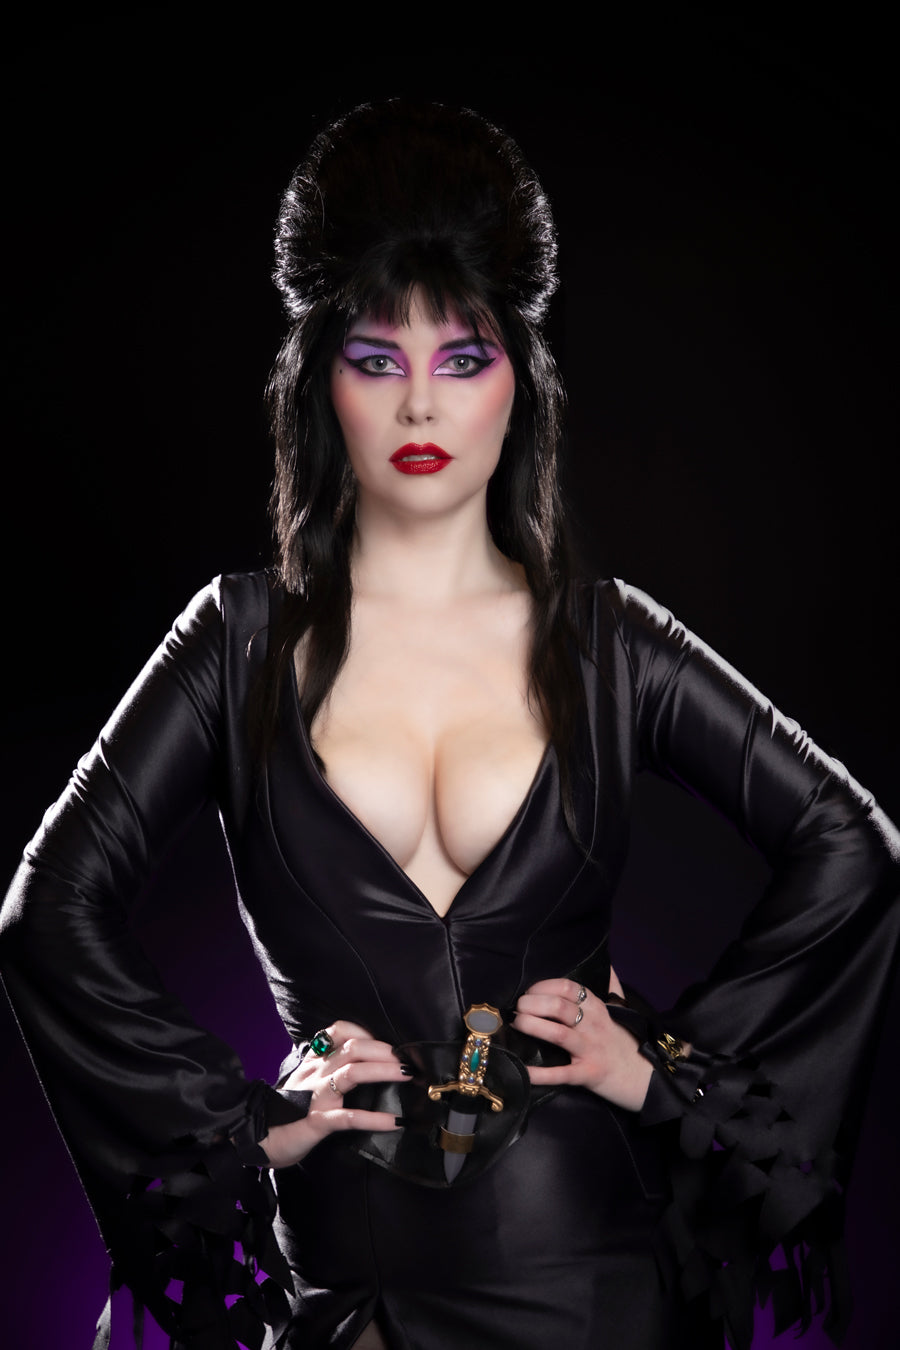 "If they ever ask about me, tell them I was more than just a great set of boobs. I was also an incredible pair of legs." Elvira Mistress of the Dark, 1980s Halloween Queen Costume Hire or Cosplay, plus Makeup and Photography. Proudly by and available at, Little Shop of Horrors Costumery 6/1 Watt Rd Mornington & Melbourne